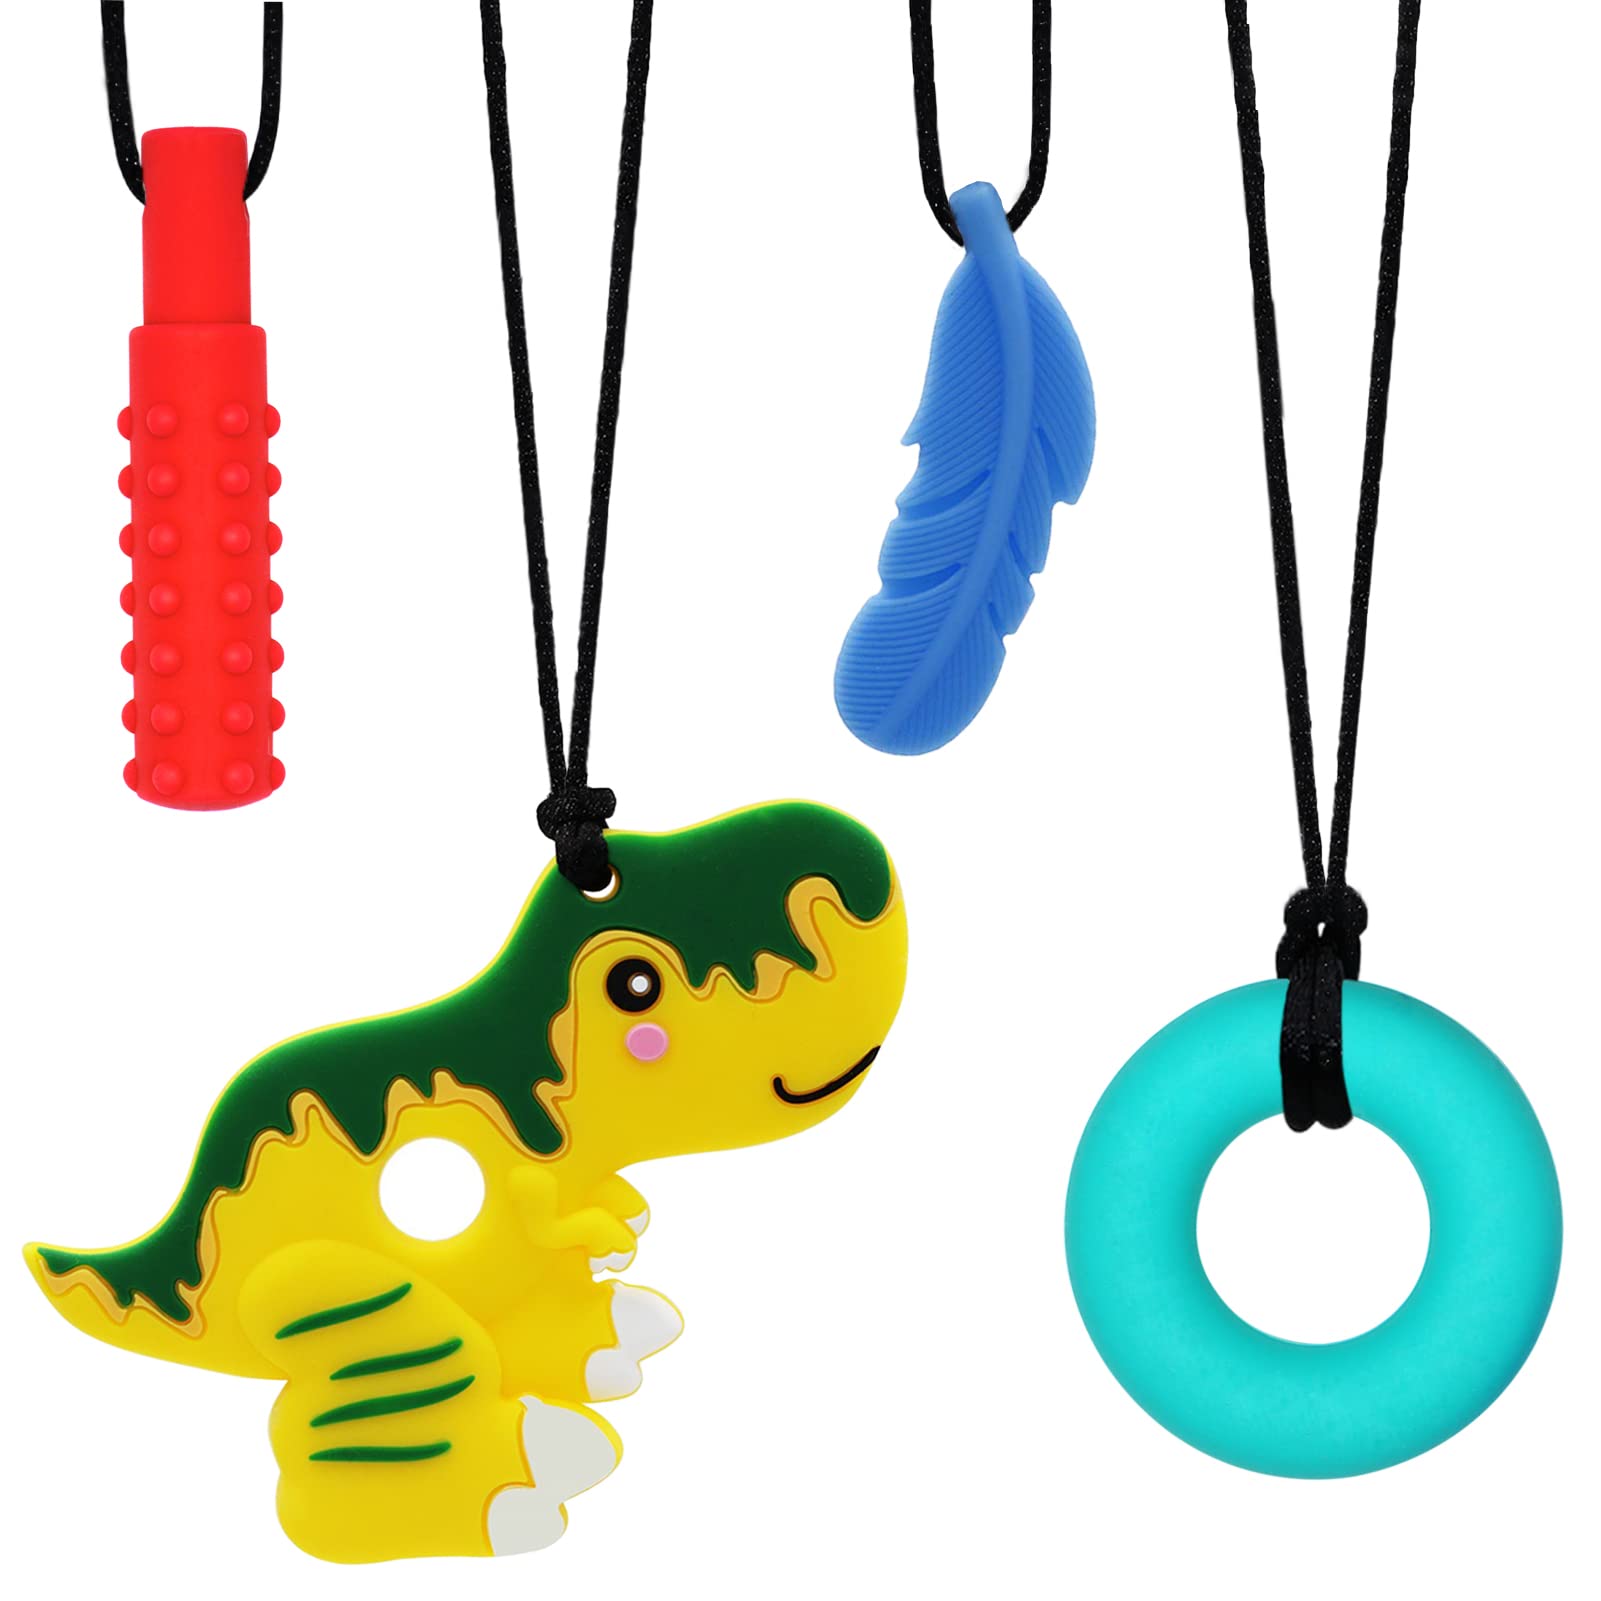 Chew Necklace for Sensory Kids 2 Pack Chewy Silicone Beads Teething  Necklaces for Boys and Girls with Autism ADHD SPD Chewable Fidget Toys to  Calms and Reduces Biting Chewing Fidgeting